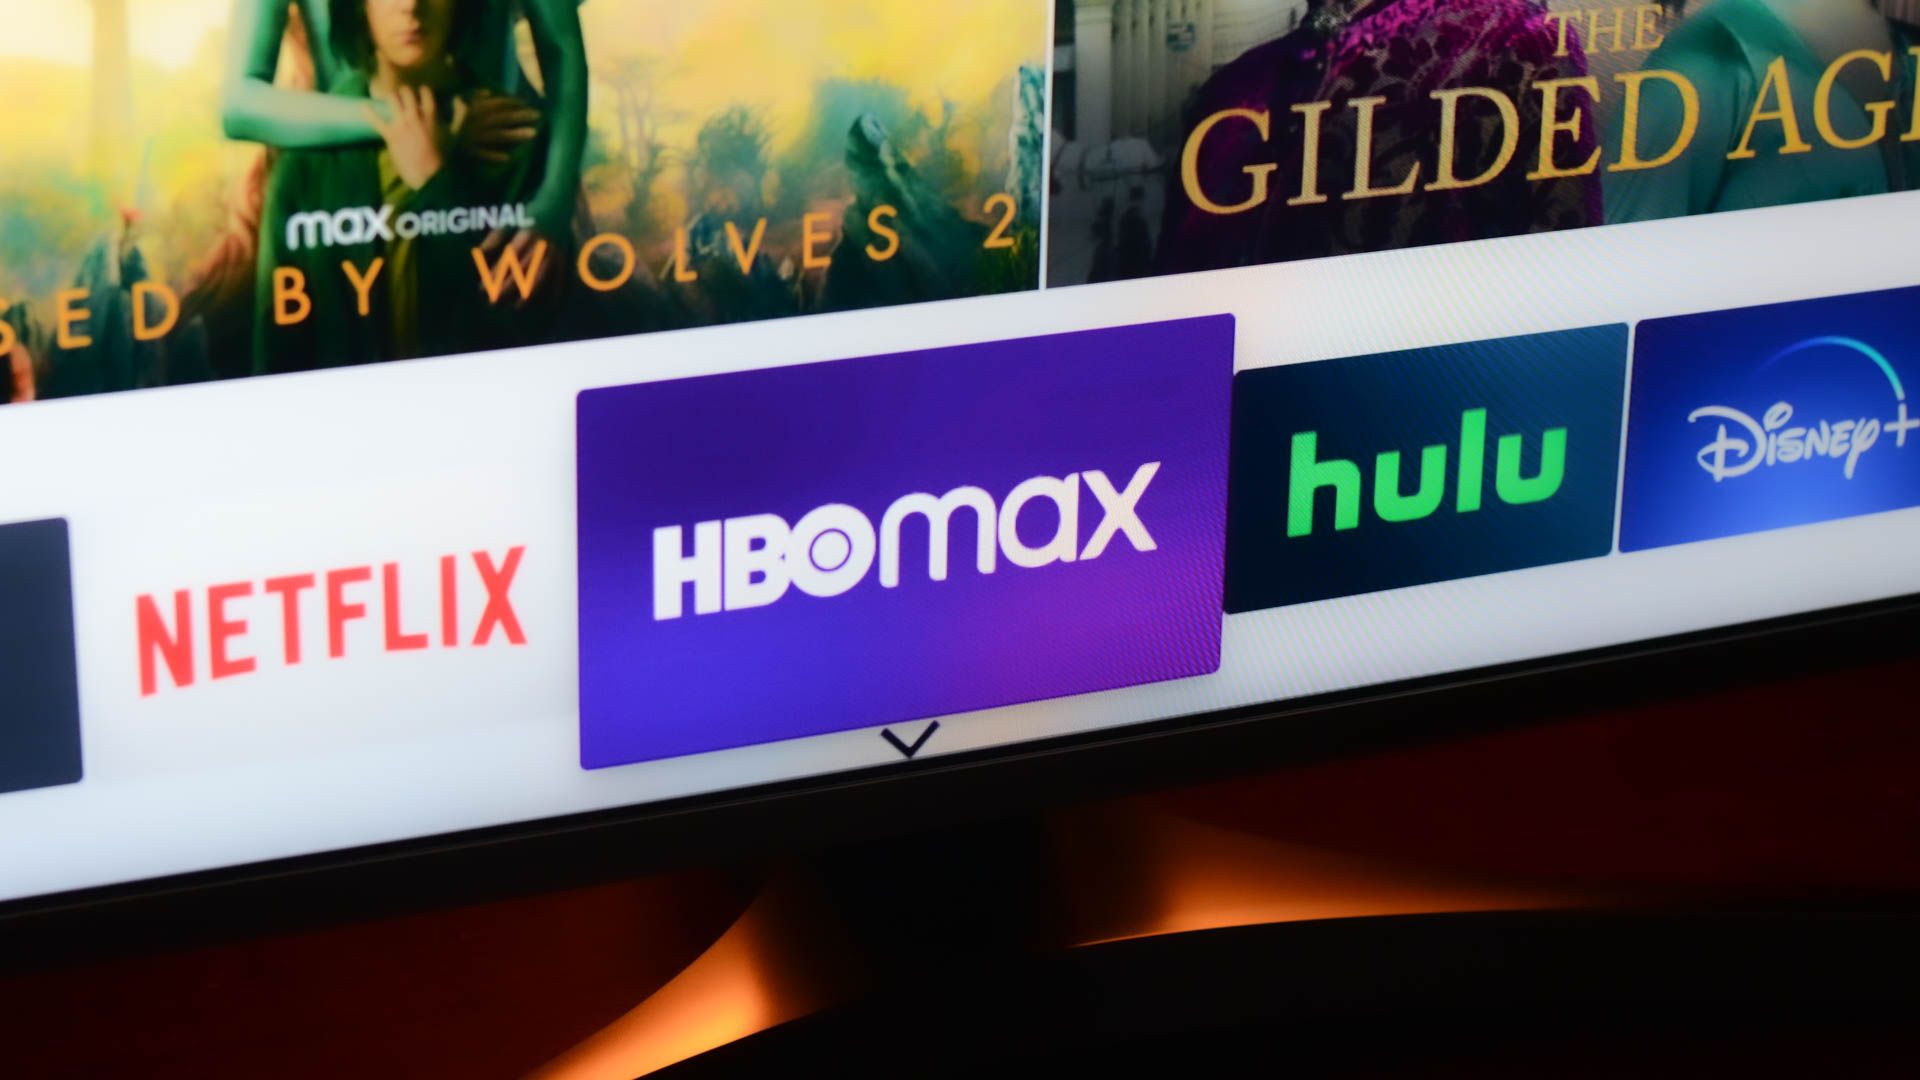 A smart TV showing the HBO Max logo.